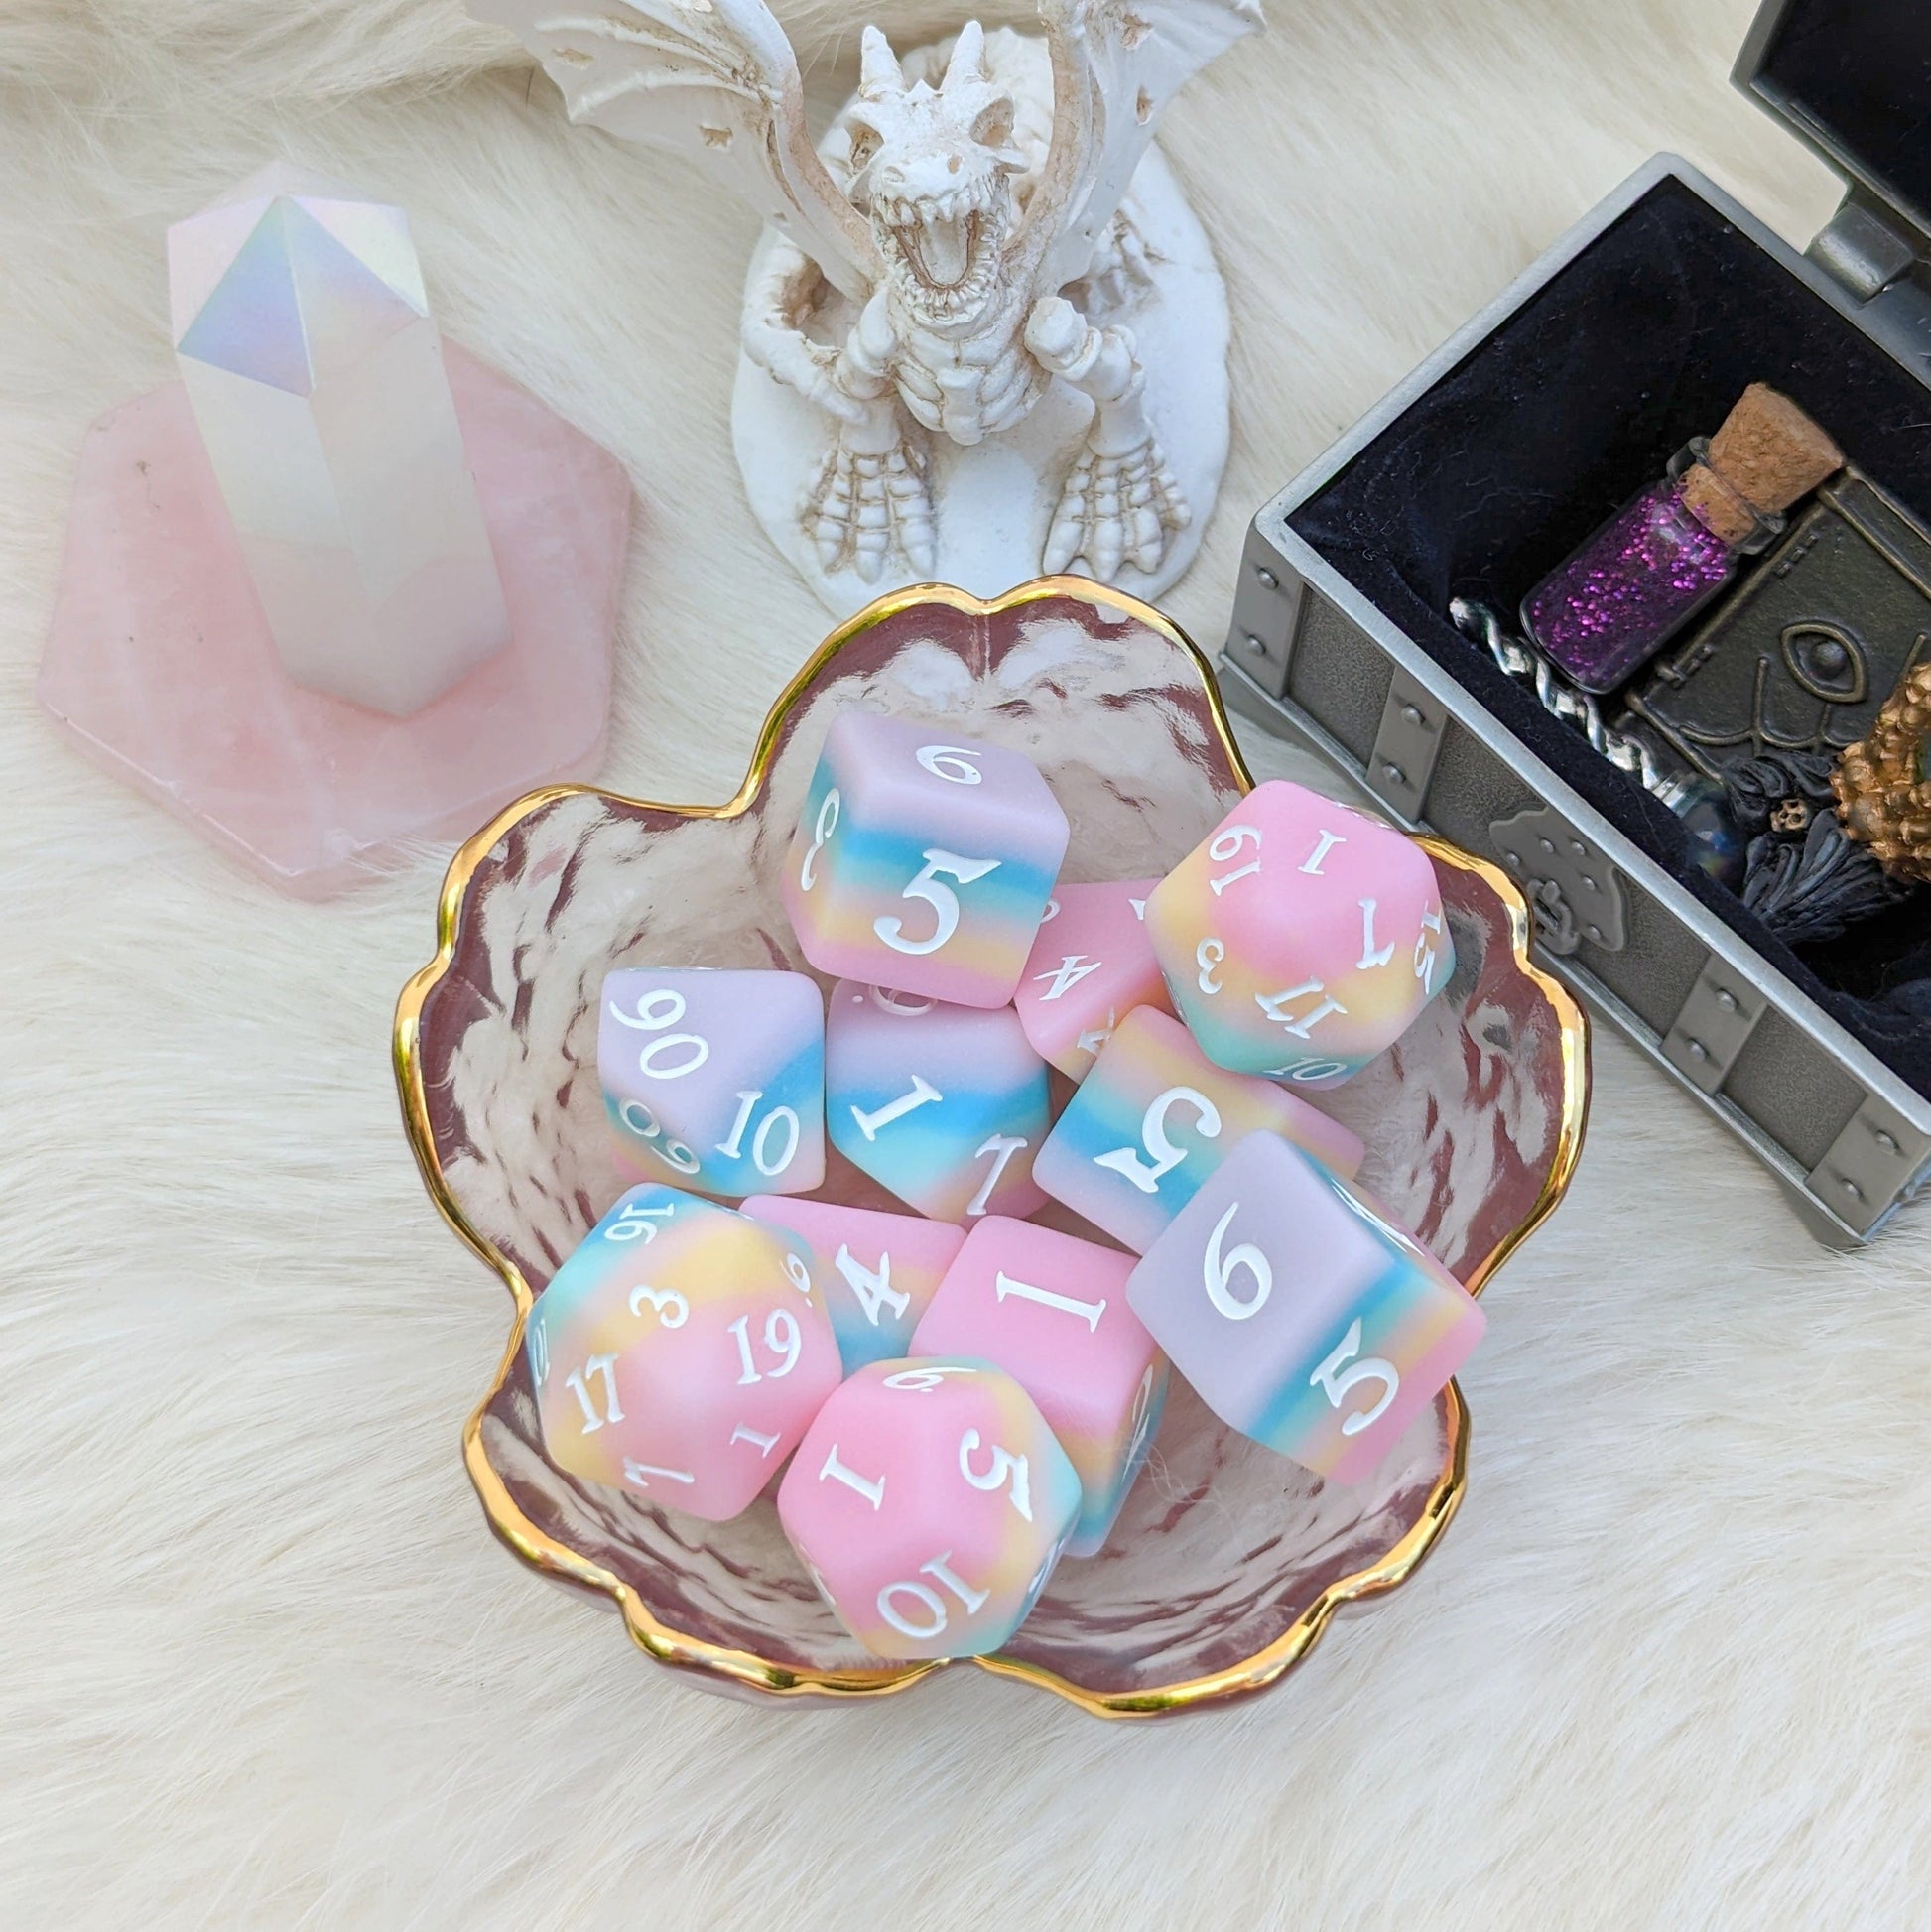 Dazed and Dreamy DnD Dice Sets - 11 Piece, 7 Piece, 6D6 and 5D10 Sets